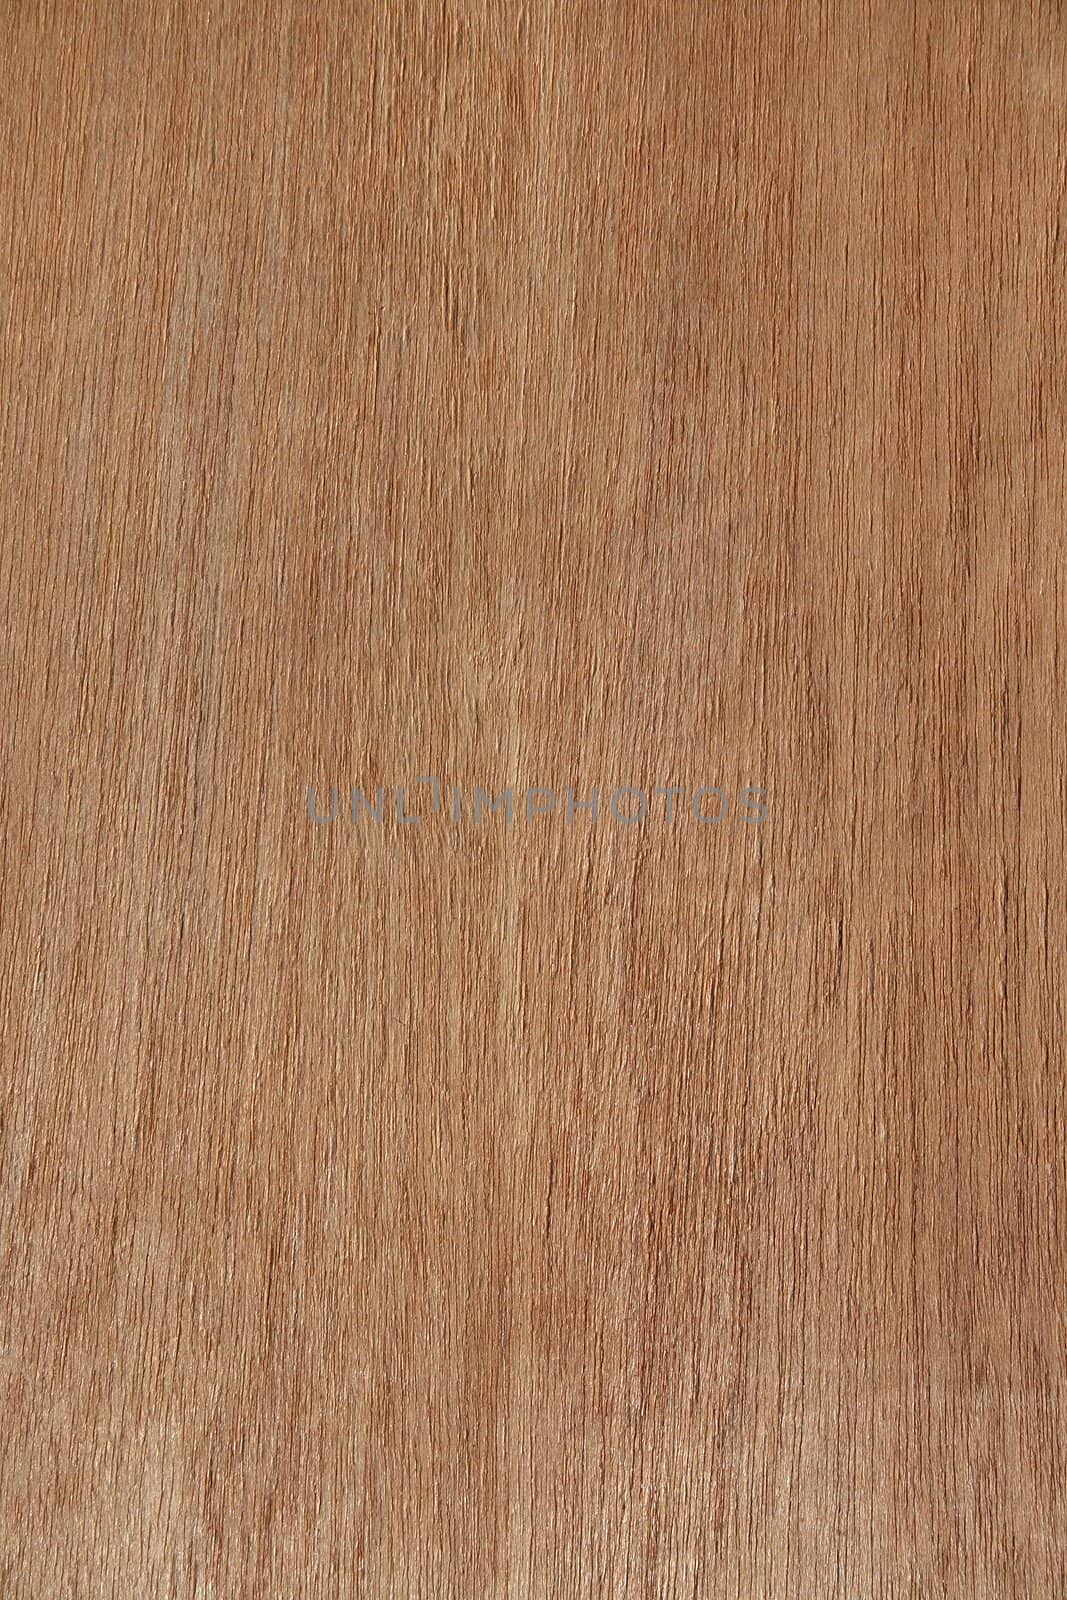 Wood texture. Wooden panel of natural color.